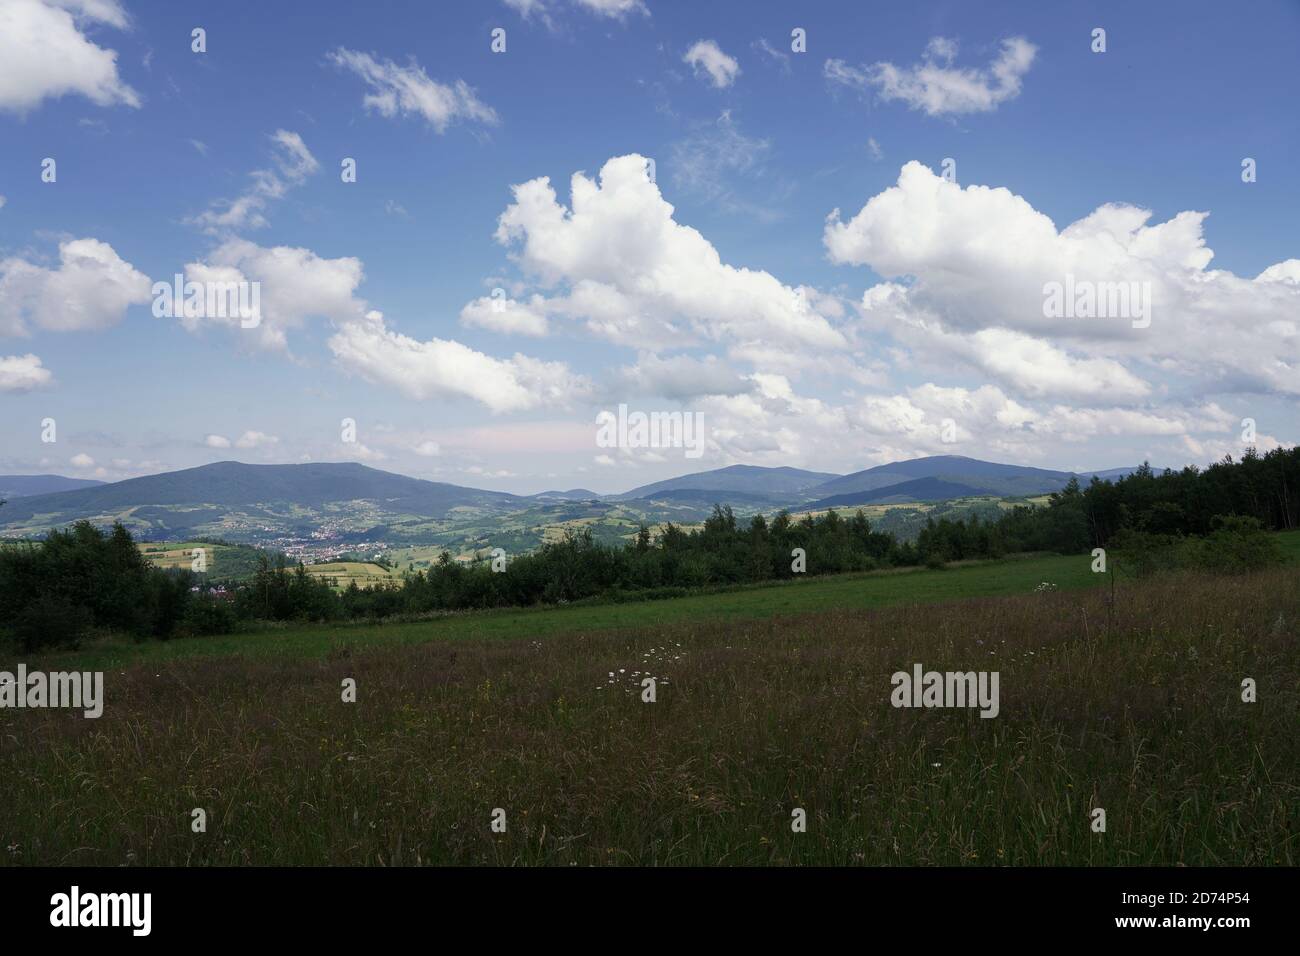 July in the Beskids, view from a mountain meadow on the forest, peaks and valleys, landscape Stock Photo